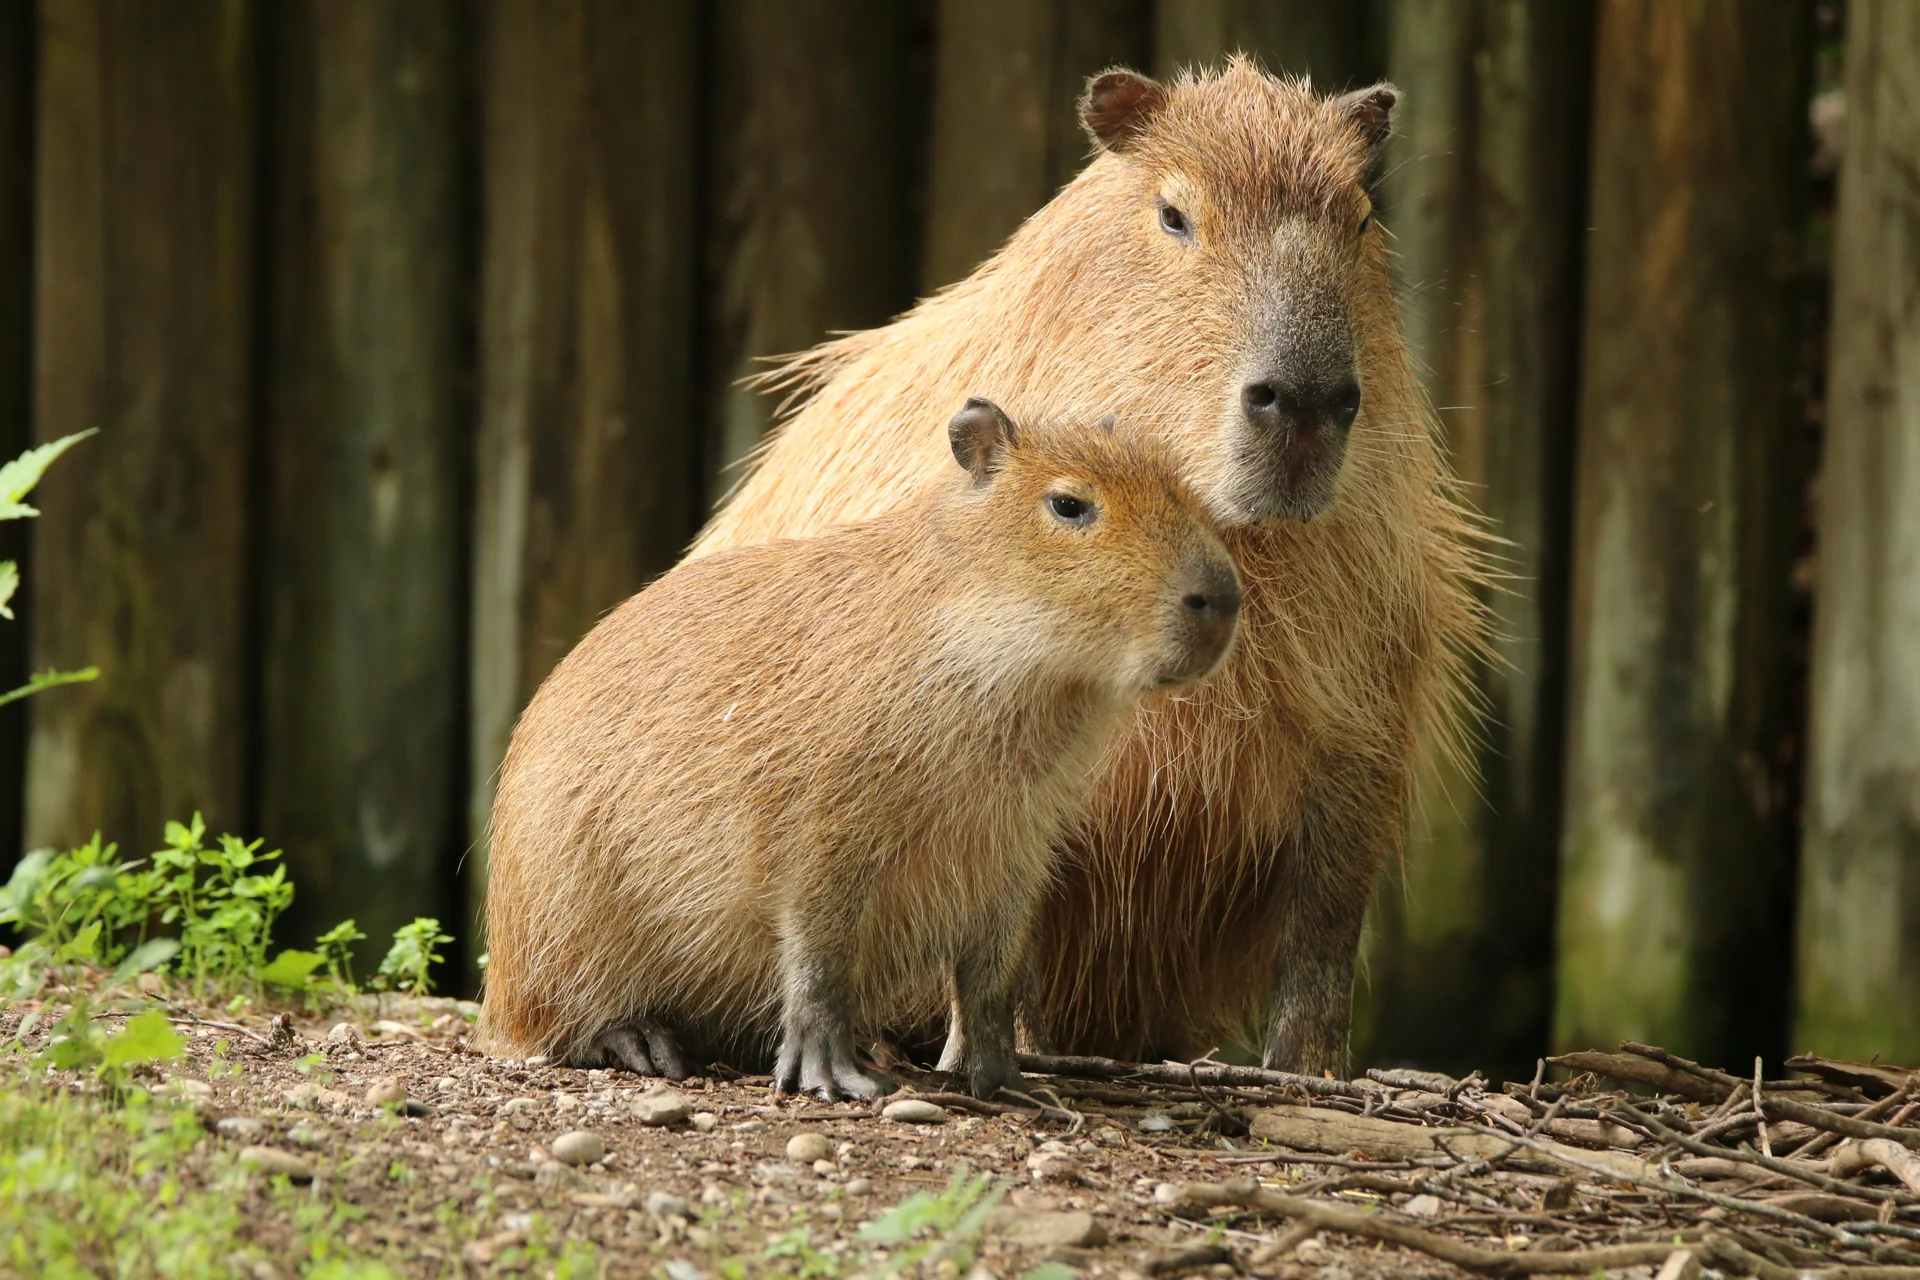 Capybara with her young sitting on a ground covered with twigs and a bit of vegetation.